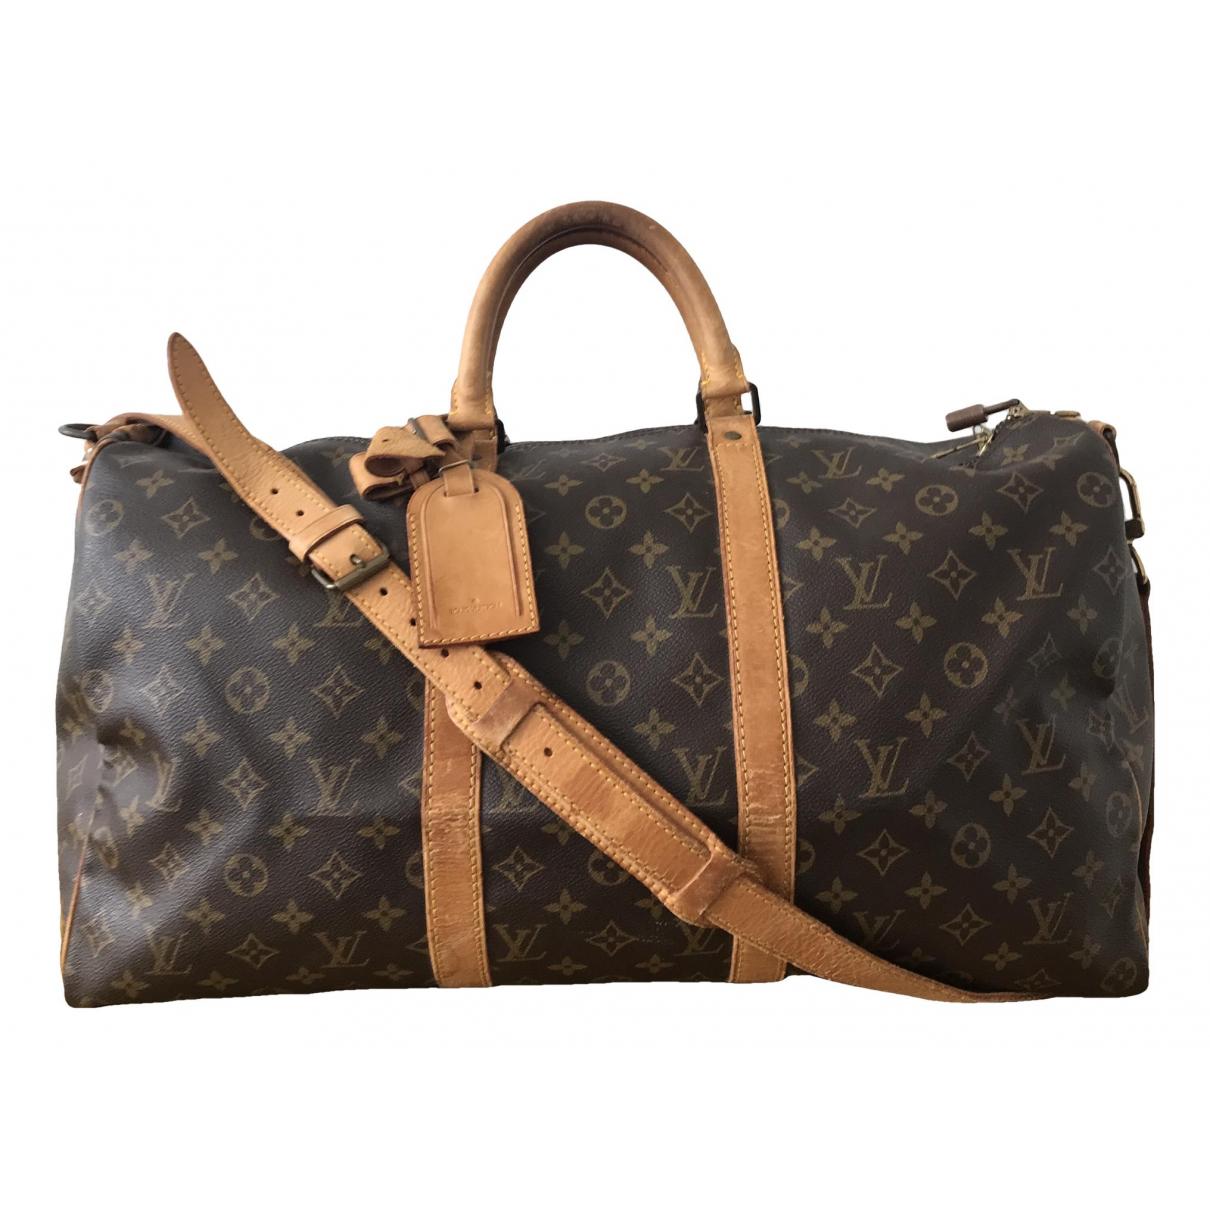 Louis-Gasm - pre-loved Louis Vuitton Luggage including Keepalls I